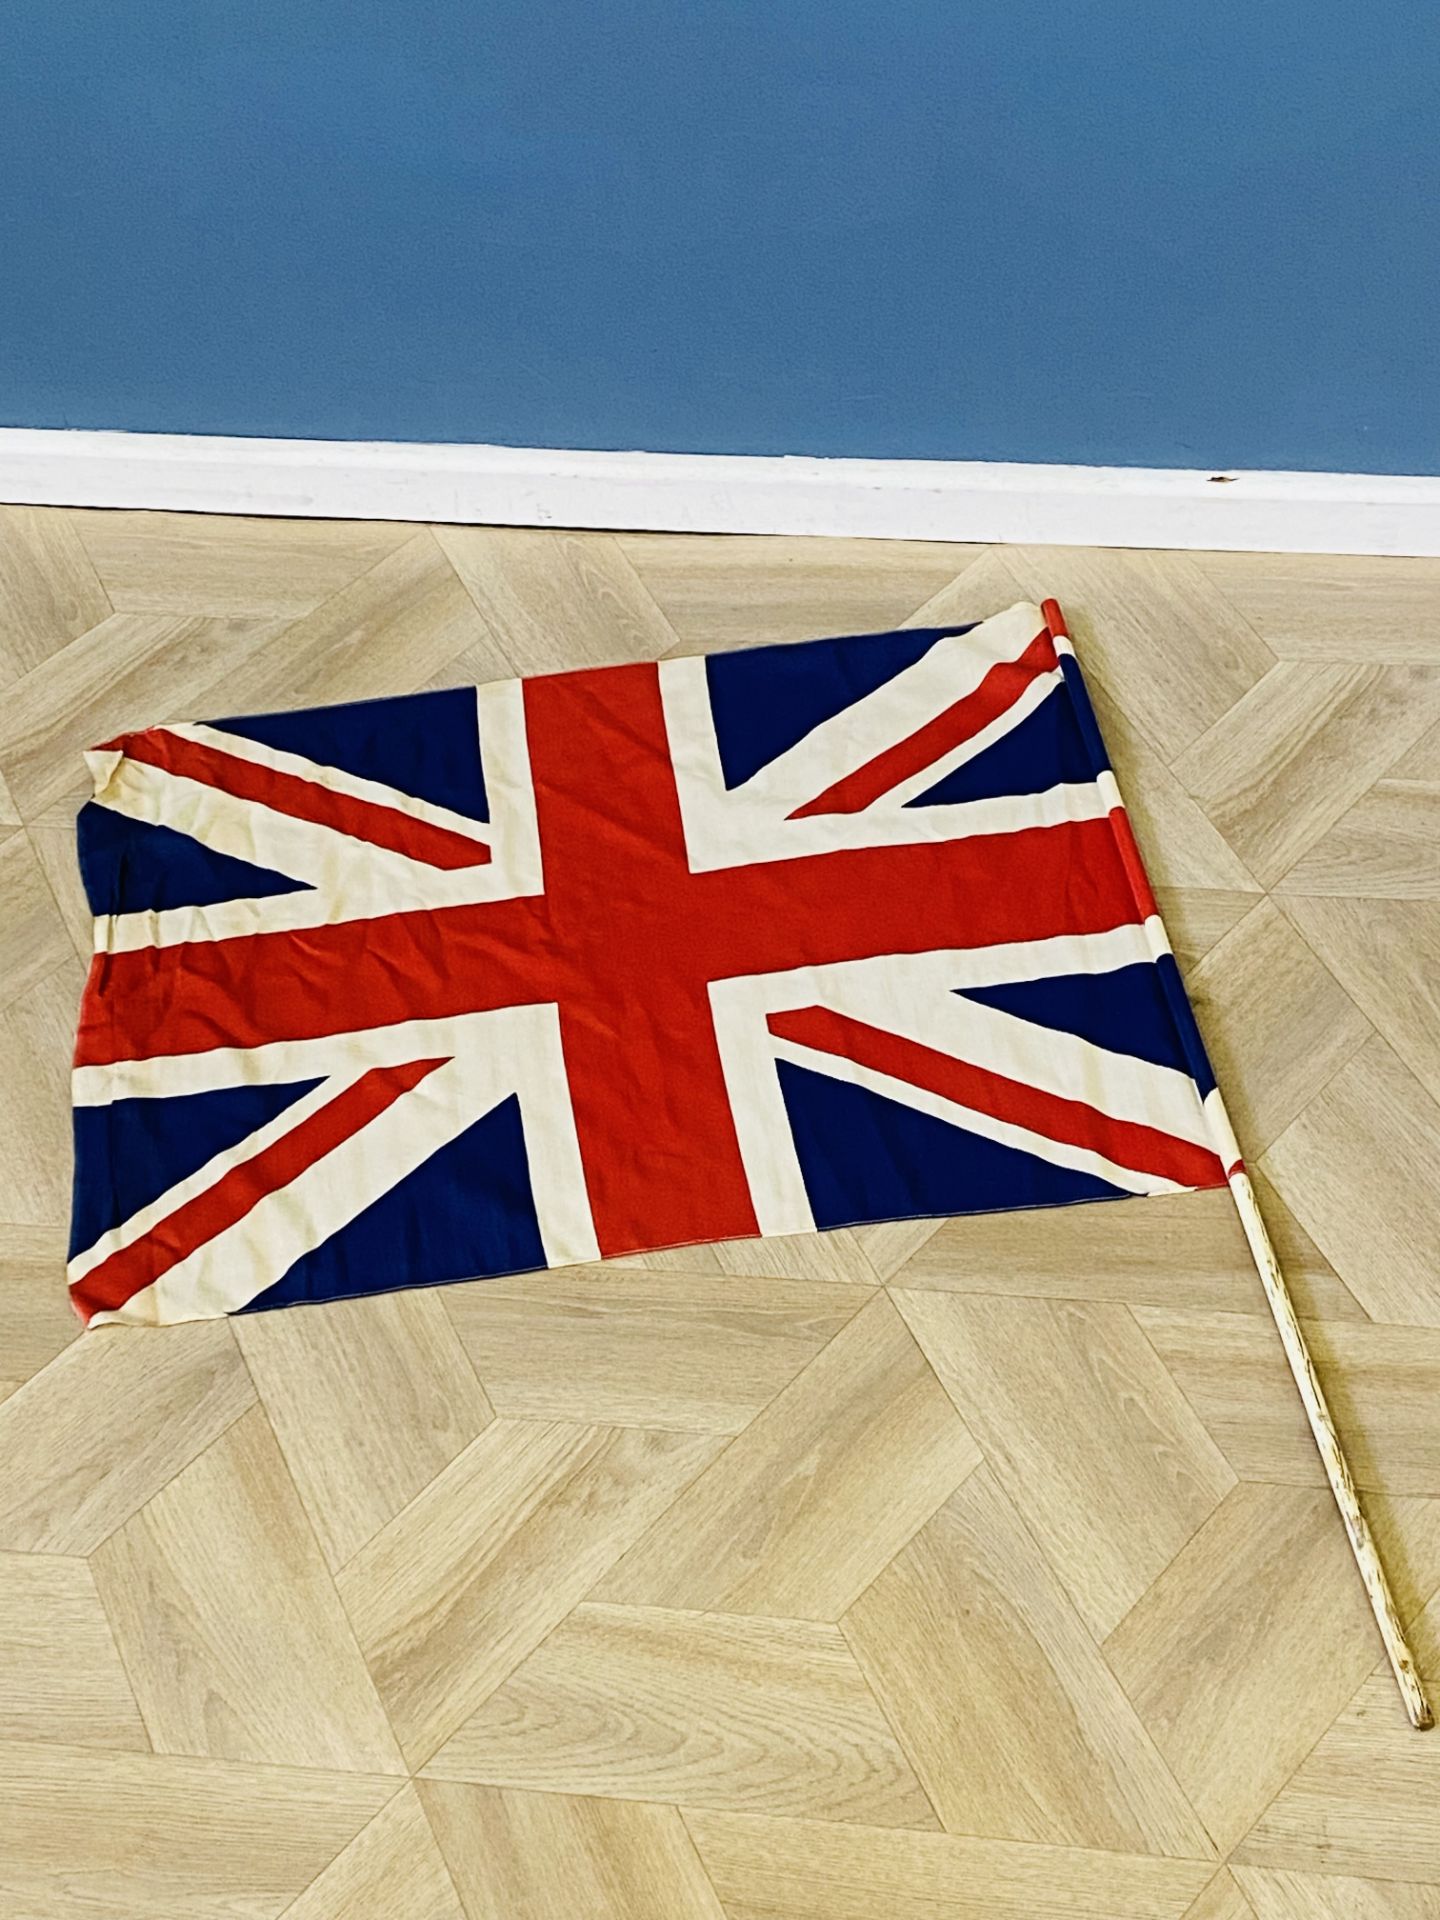 Four Union Jack flags on poles - Image 3 of 5